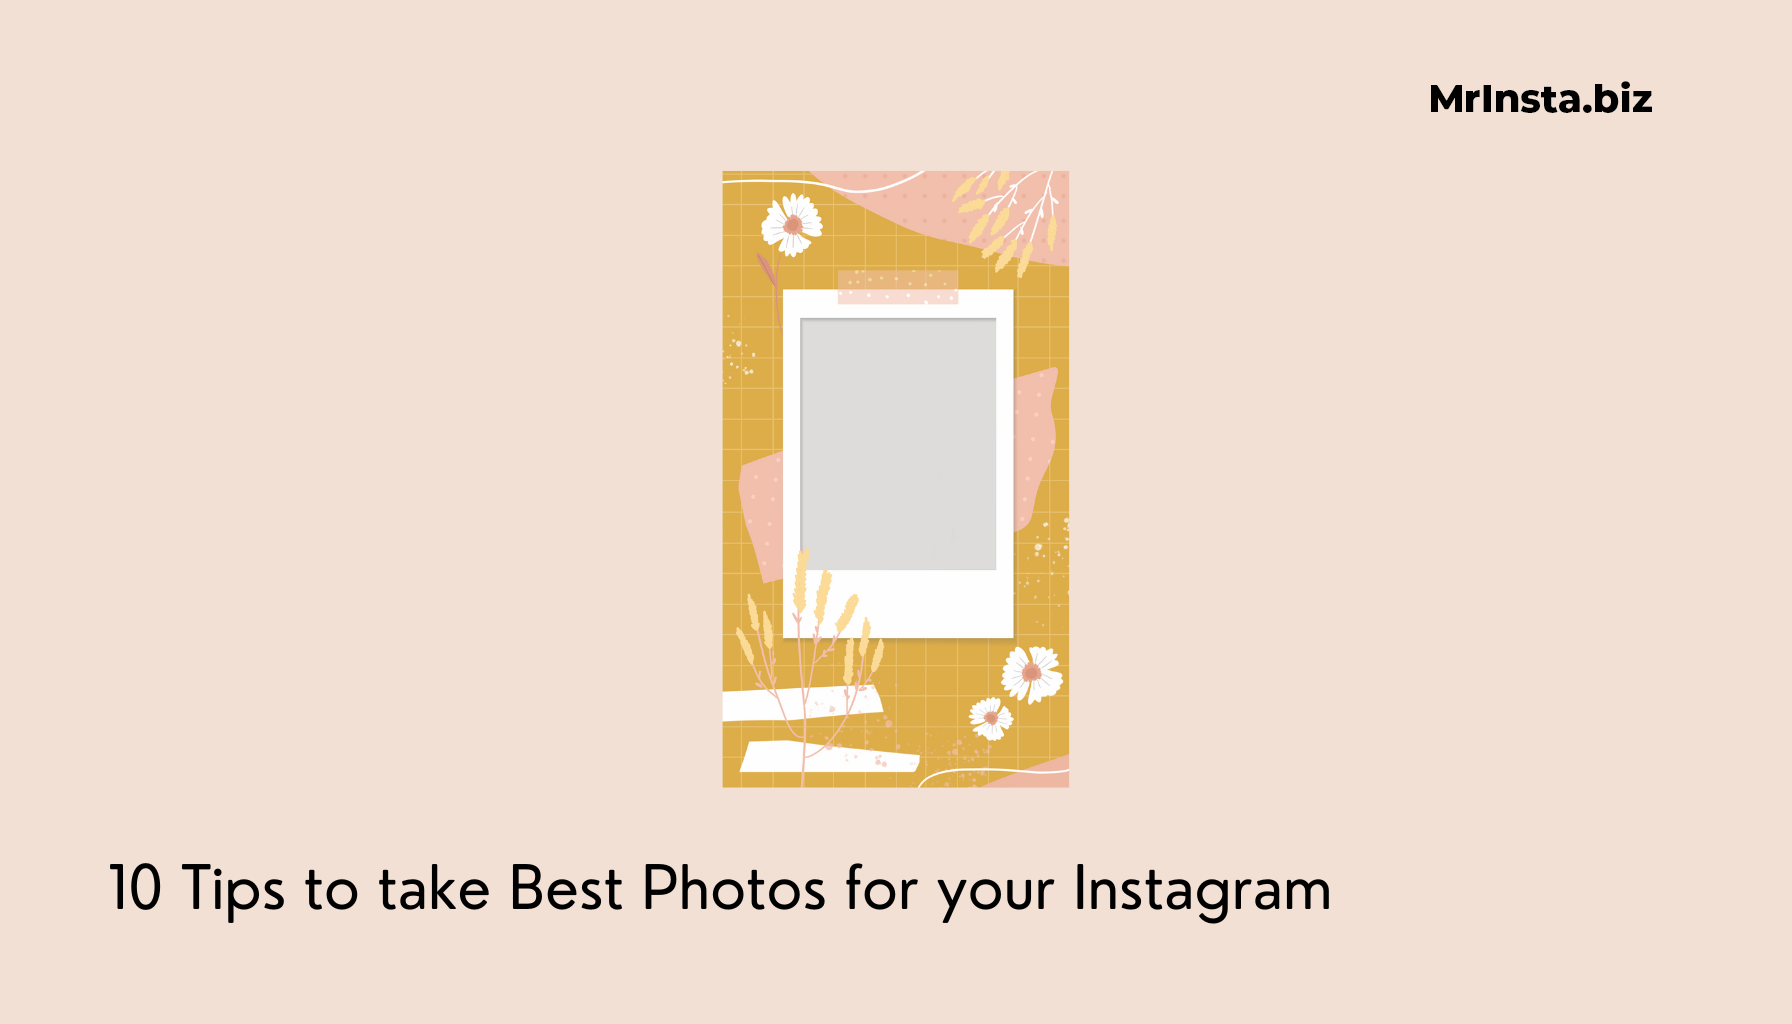 10 Tips to take Best Photos for your Instagram